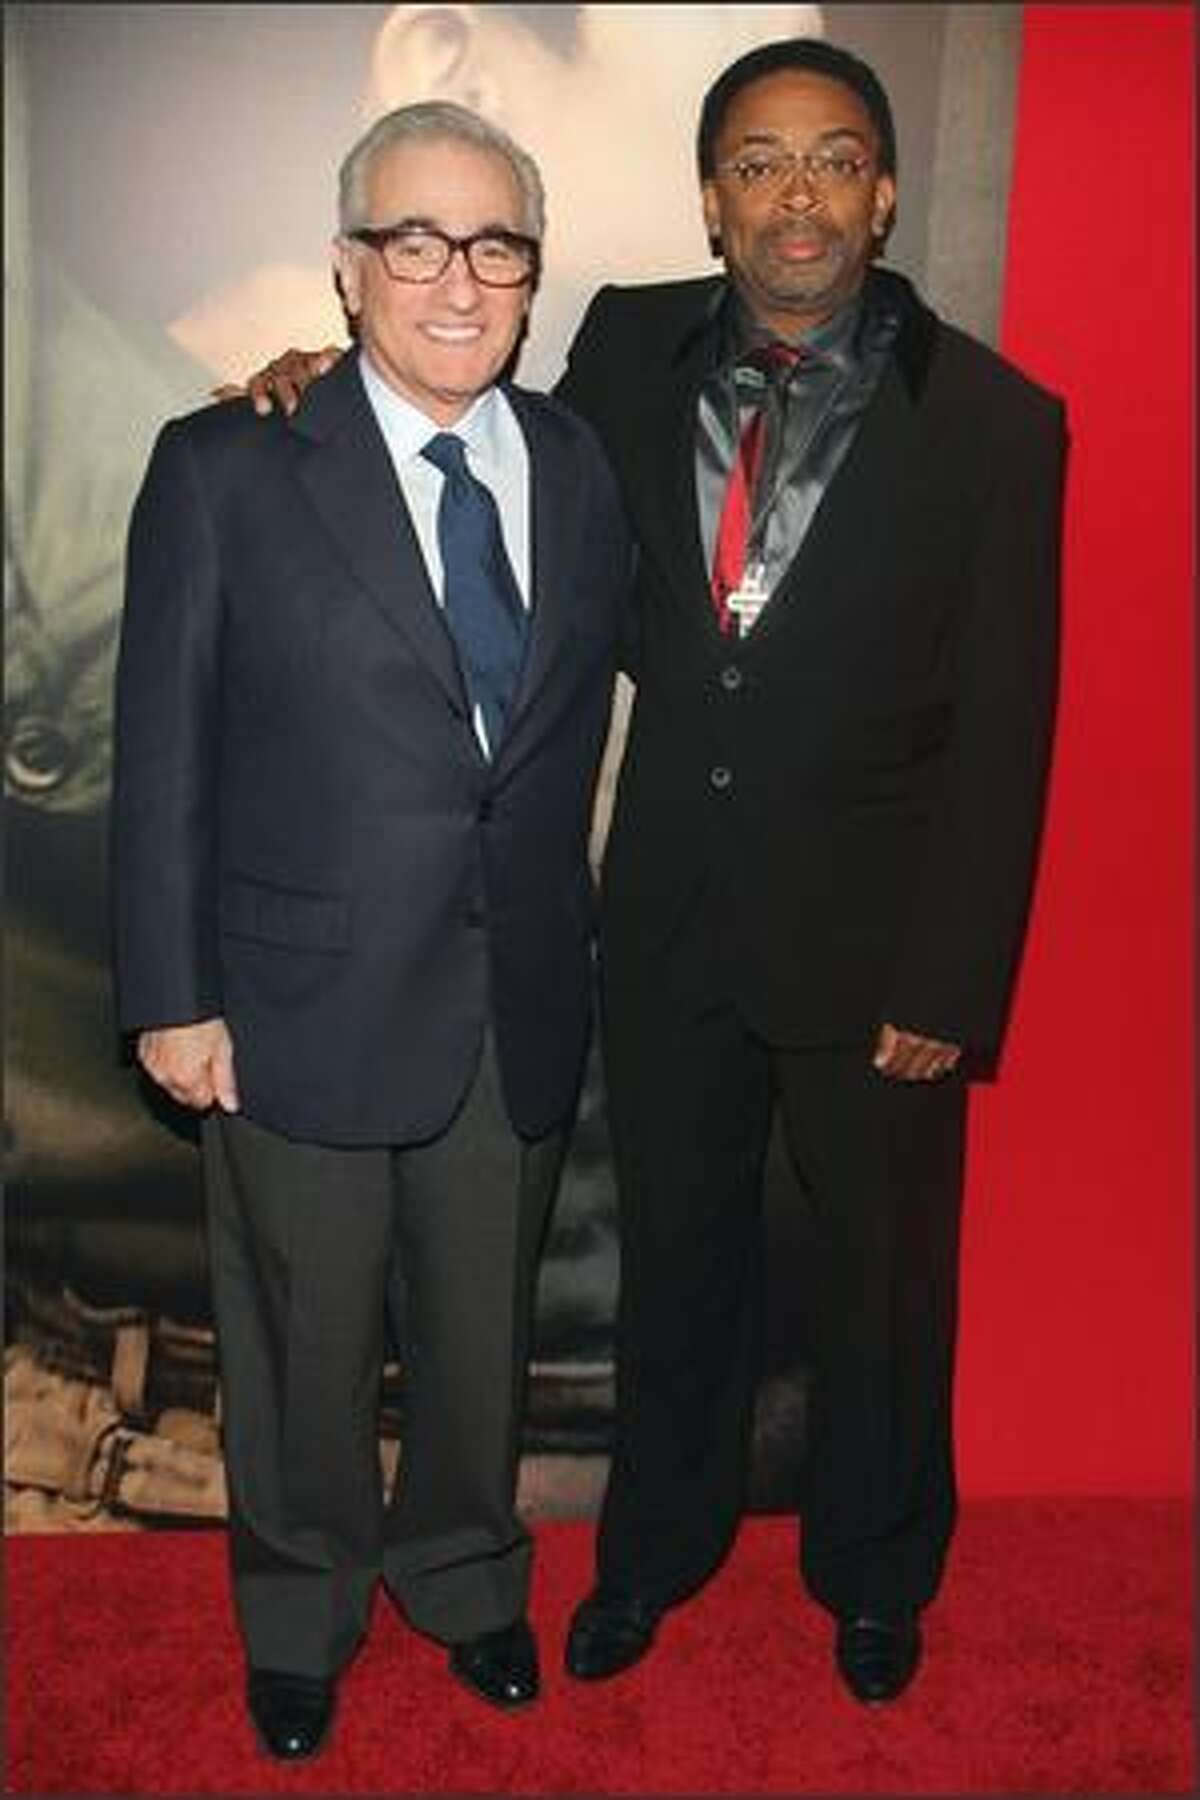 Directors Martin Scorsese and Spike Lee attend the premiere of "Miracle at St. Anna" at the Ziegfeld Theatre on Monday in New York City.